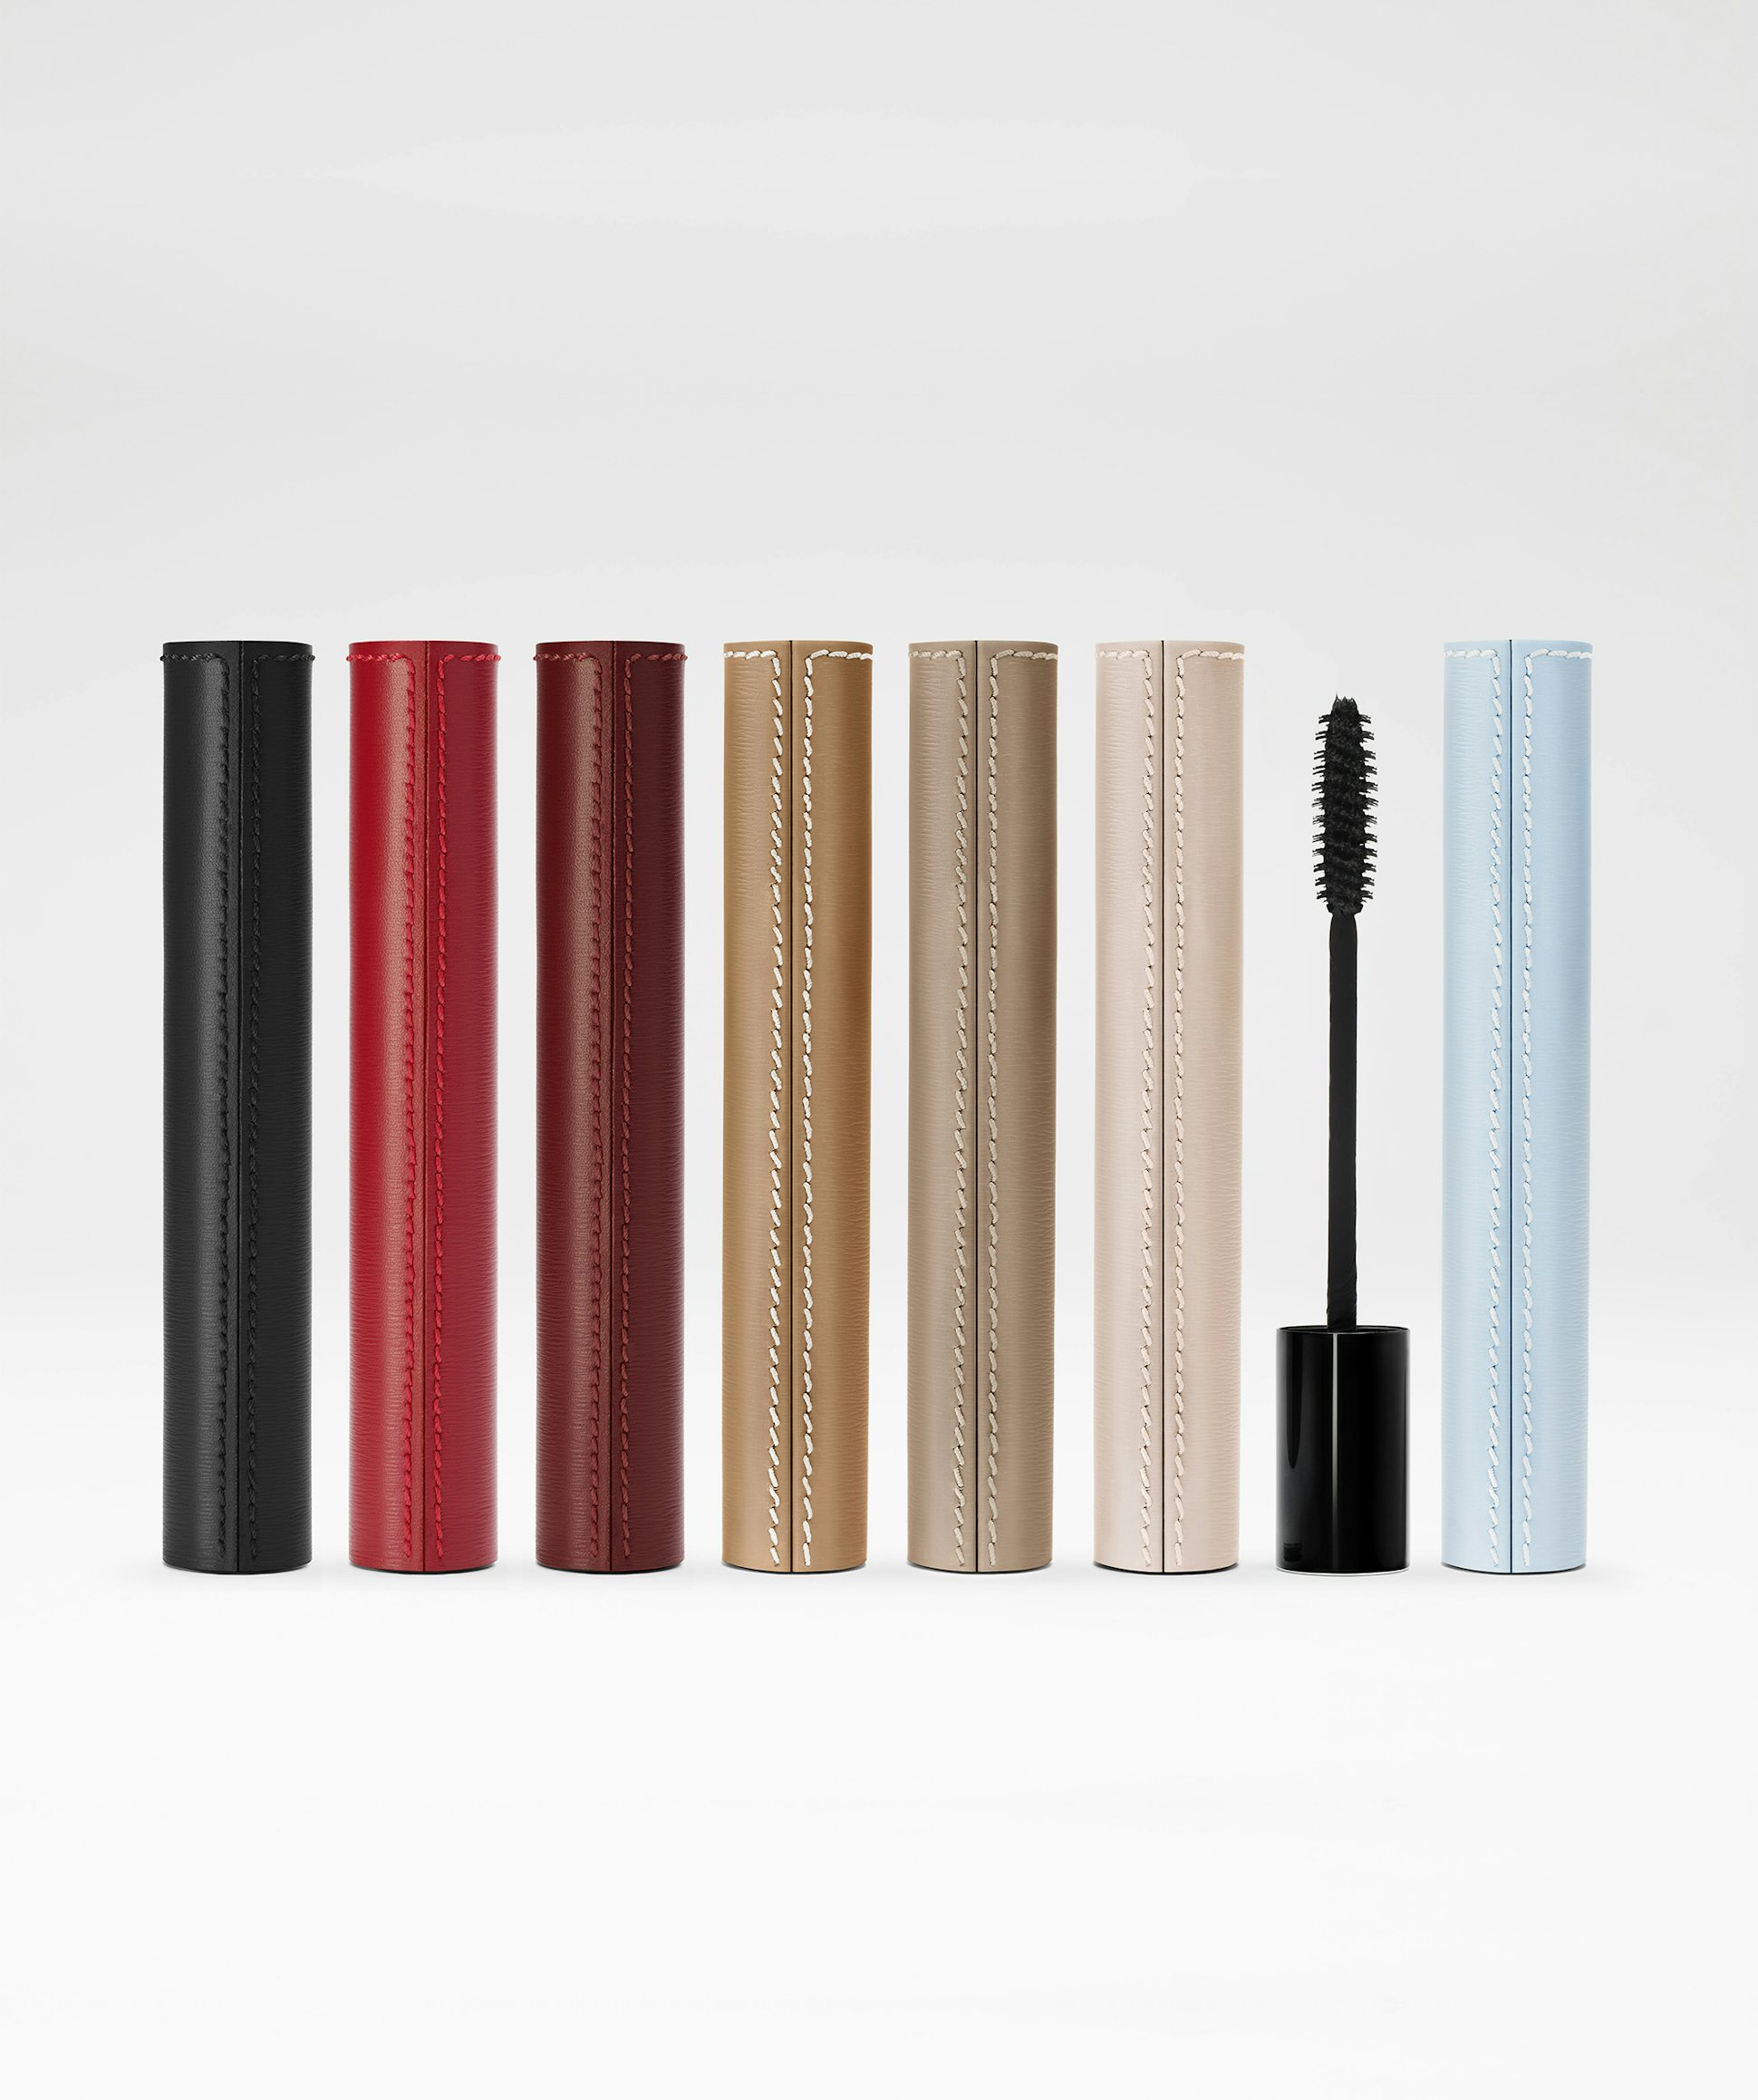 La bouche rouge, Paris fine leather sleeves family: black, red, chocolate, camel, beige, pink and blue with Le Sérum Noir mascara